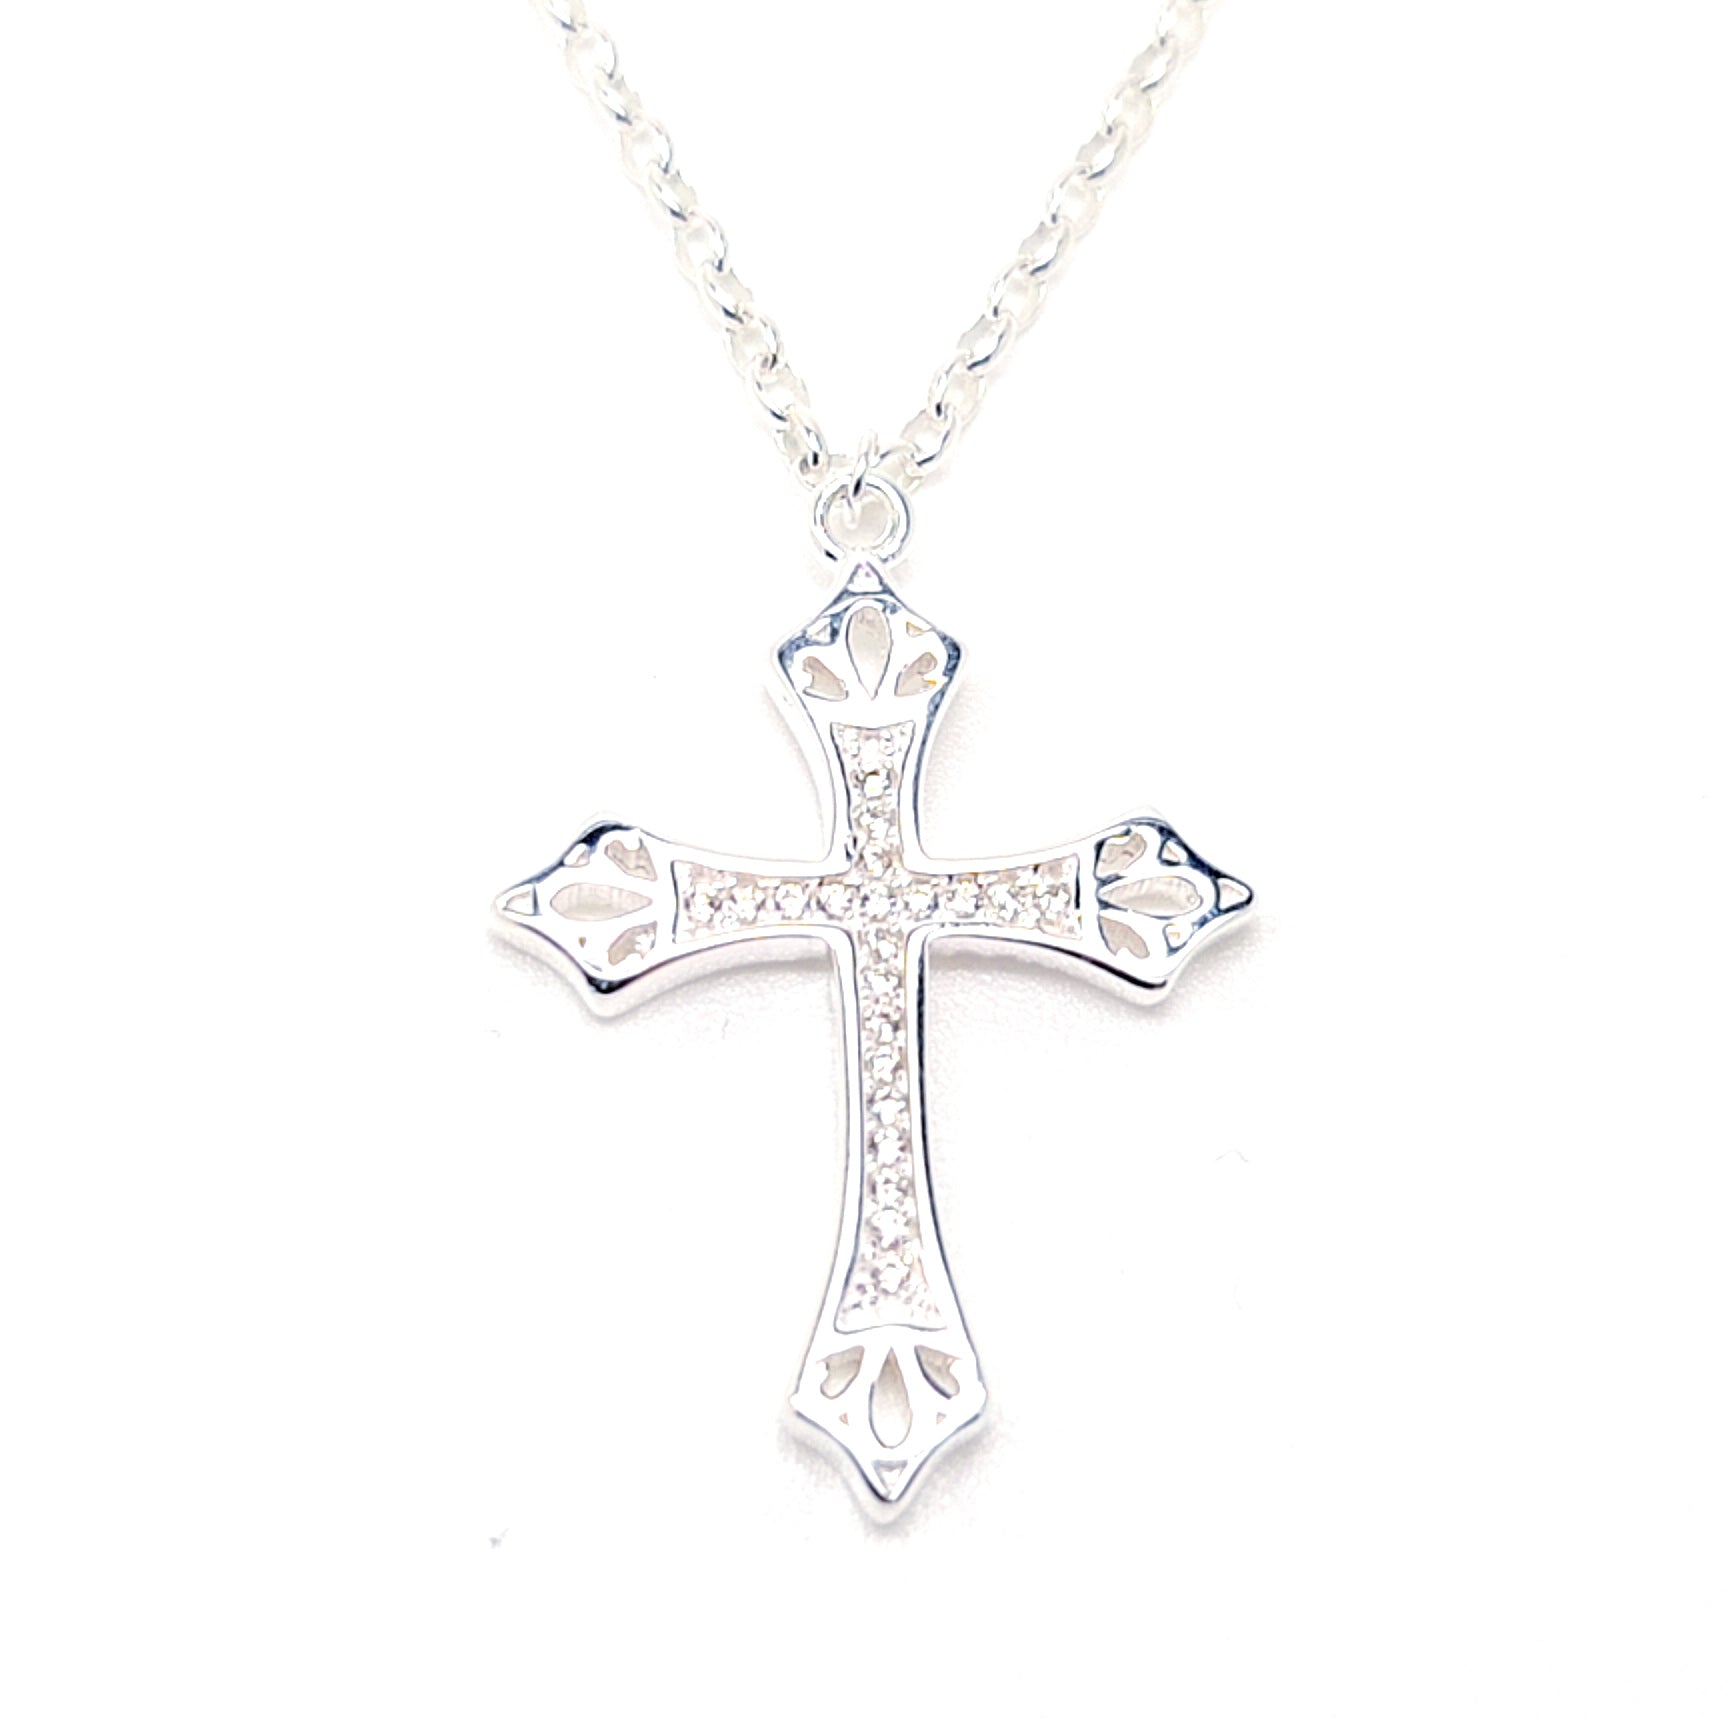 Radiant Grace Sterling Silver Cross Pendant Necklace with Crystals, First Communion Cross with Crystals in Silver